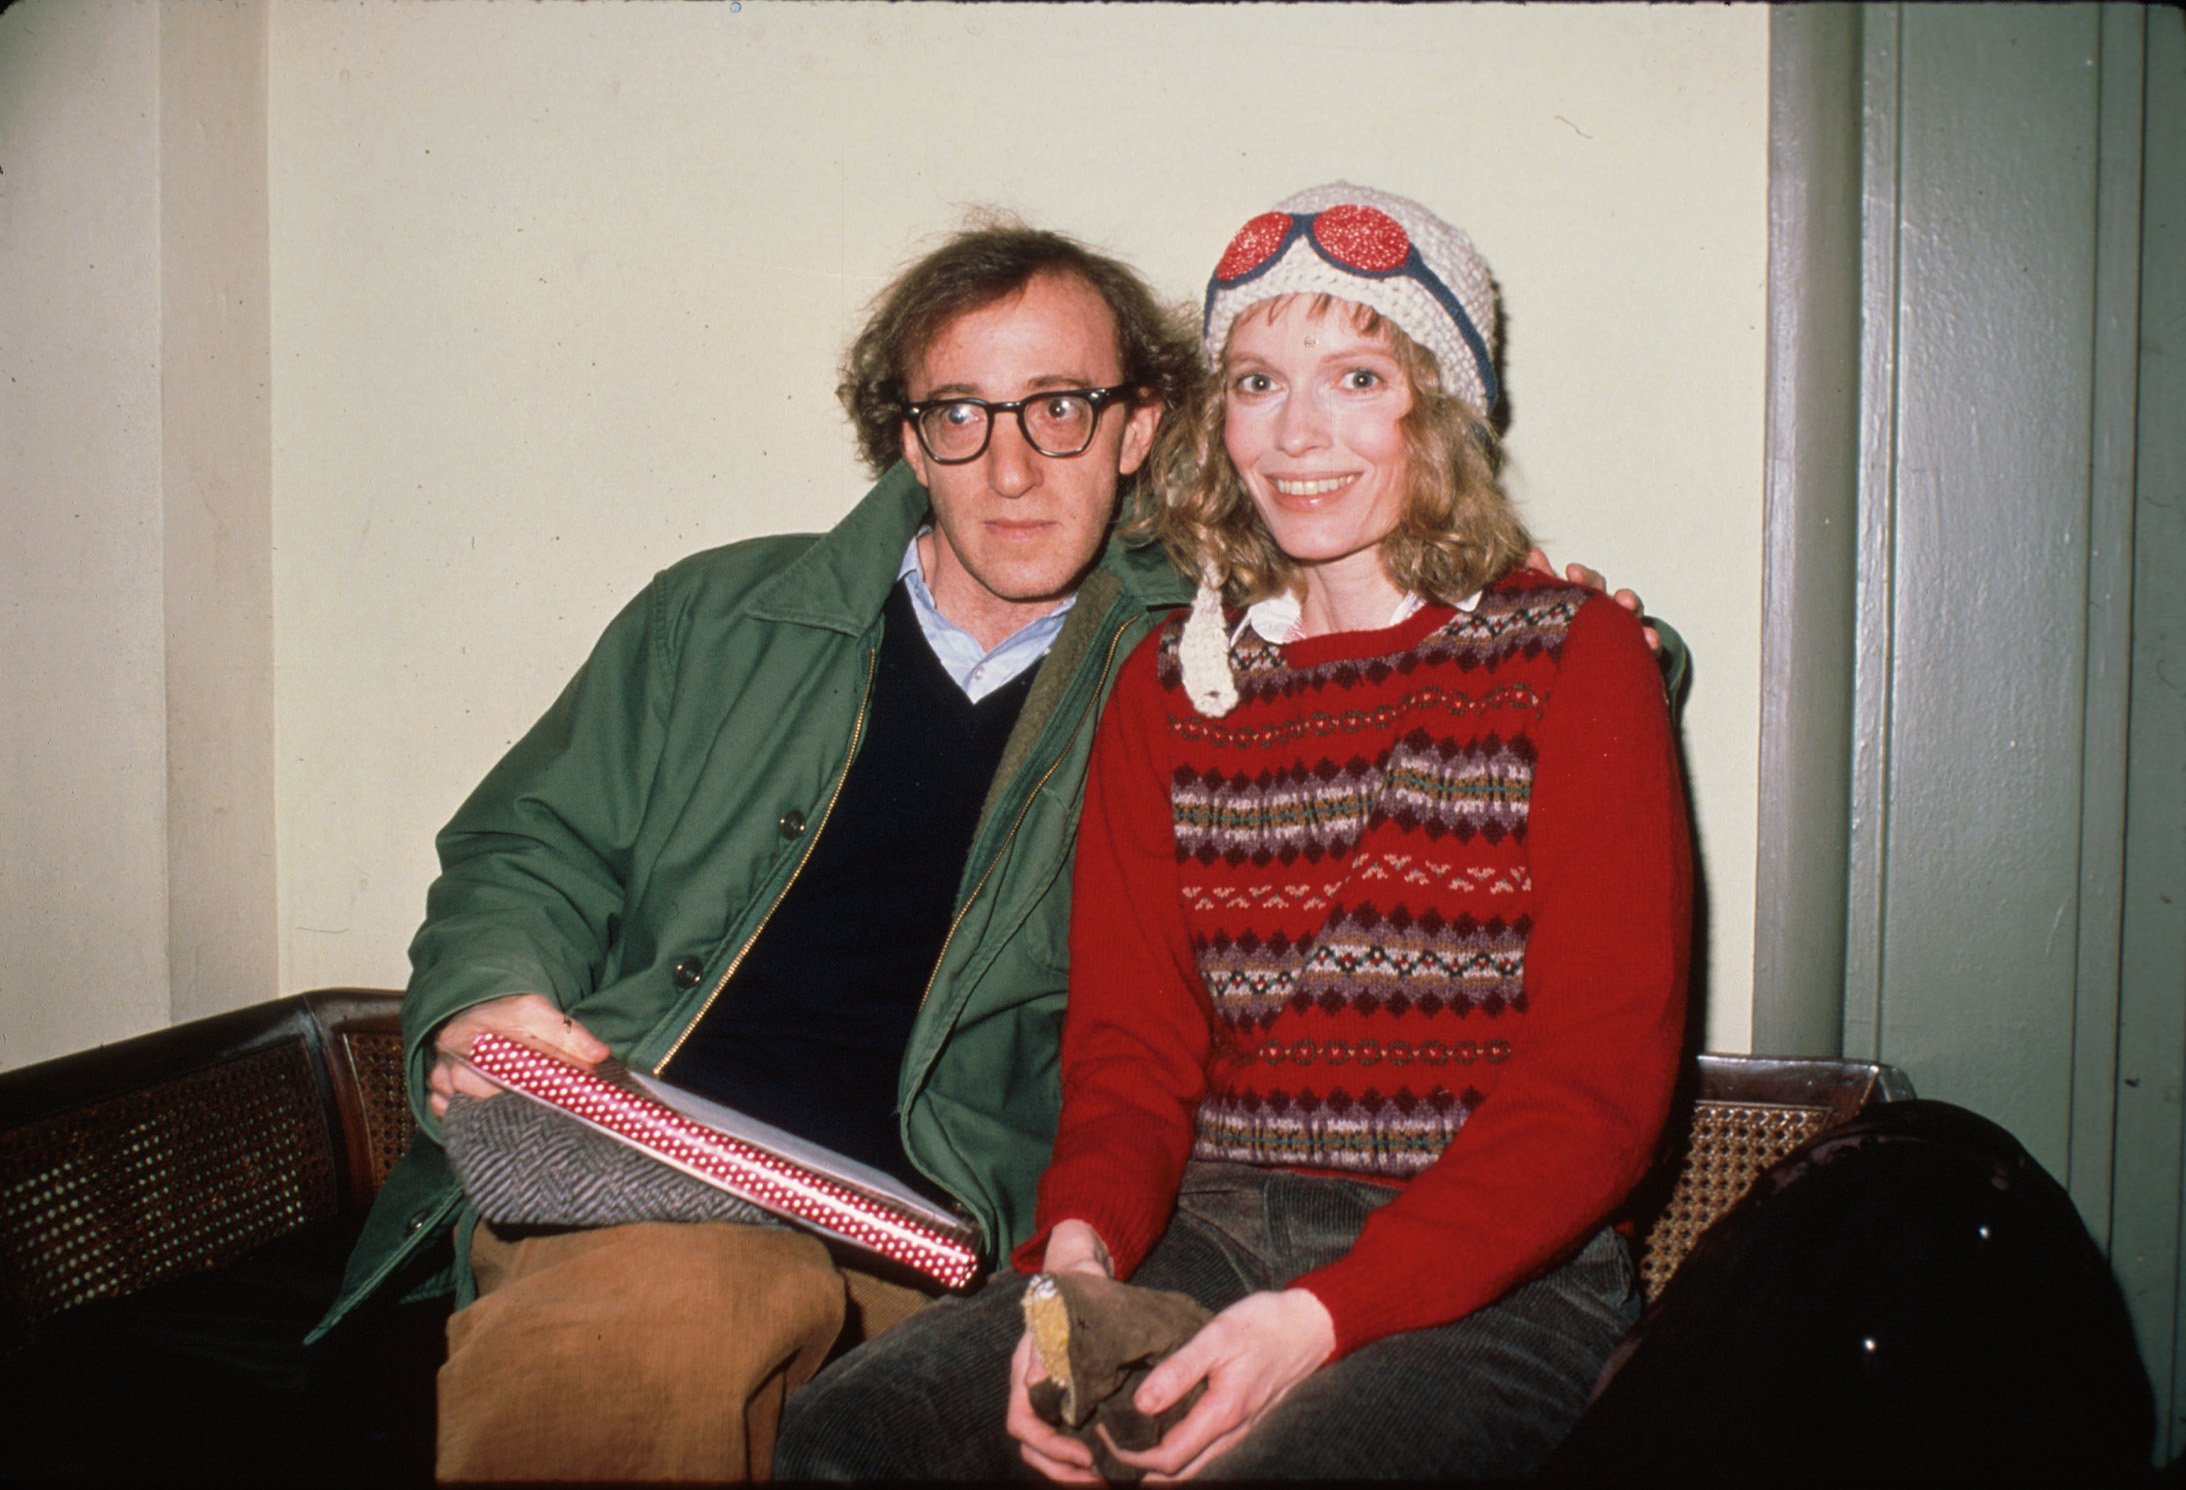 Woody Allen and Mia Farrow sitting together on a couch